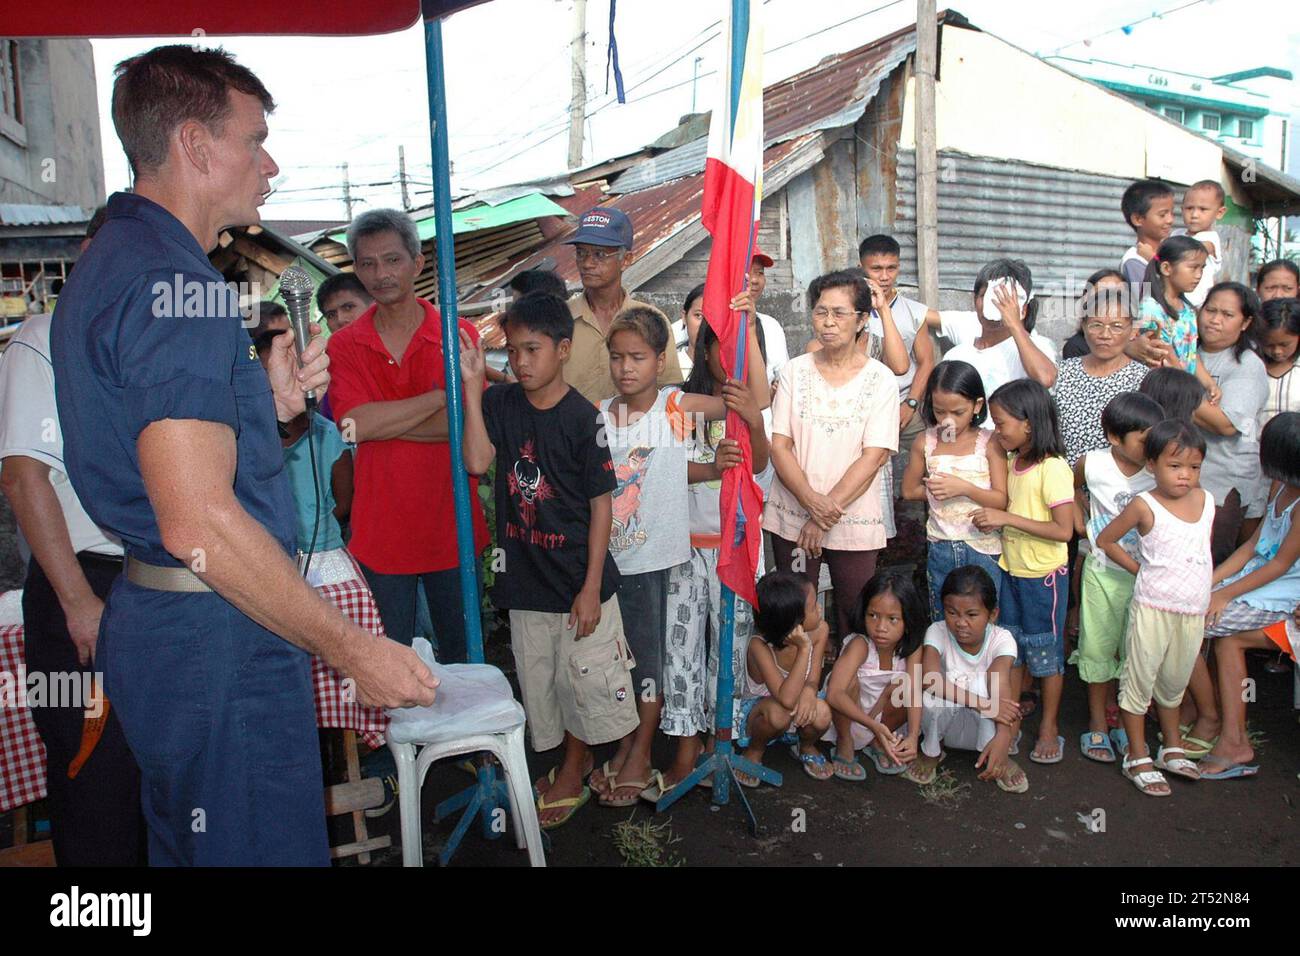 0706309421C-218 TABACO CITY, Philippines (June 30, 2007) Р Pacific Partnership mission commander, Capt. Bruce Stewart gives his closing remarks to the local citizens thanking them for welcoming amphibious assault ship USS Peleliu (LHA 5) Sailors to their beautiful country. The ceremony was held to acknowledge Sailors from Peleliu for their assistance in clearing the Tagas River of debris and mud caused by the Mayon Volcano. Peleliu is underway for Pacific Partnership 2007, a four-month humanitarian assistance mission to Southeast Asia and Oceania that includes various construction and engineer Stock Photo